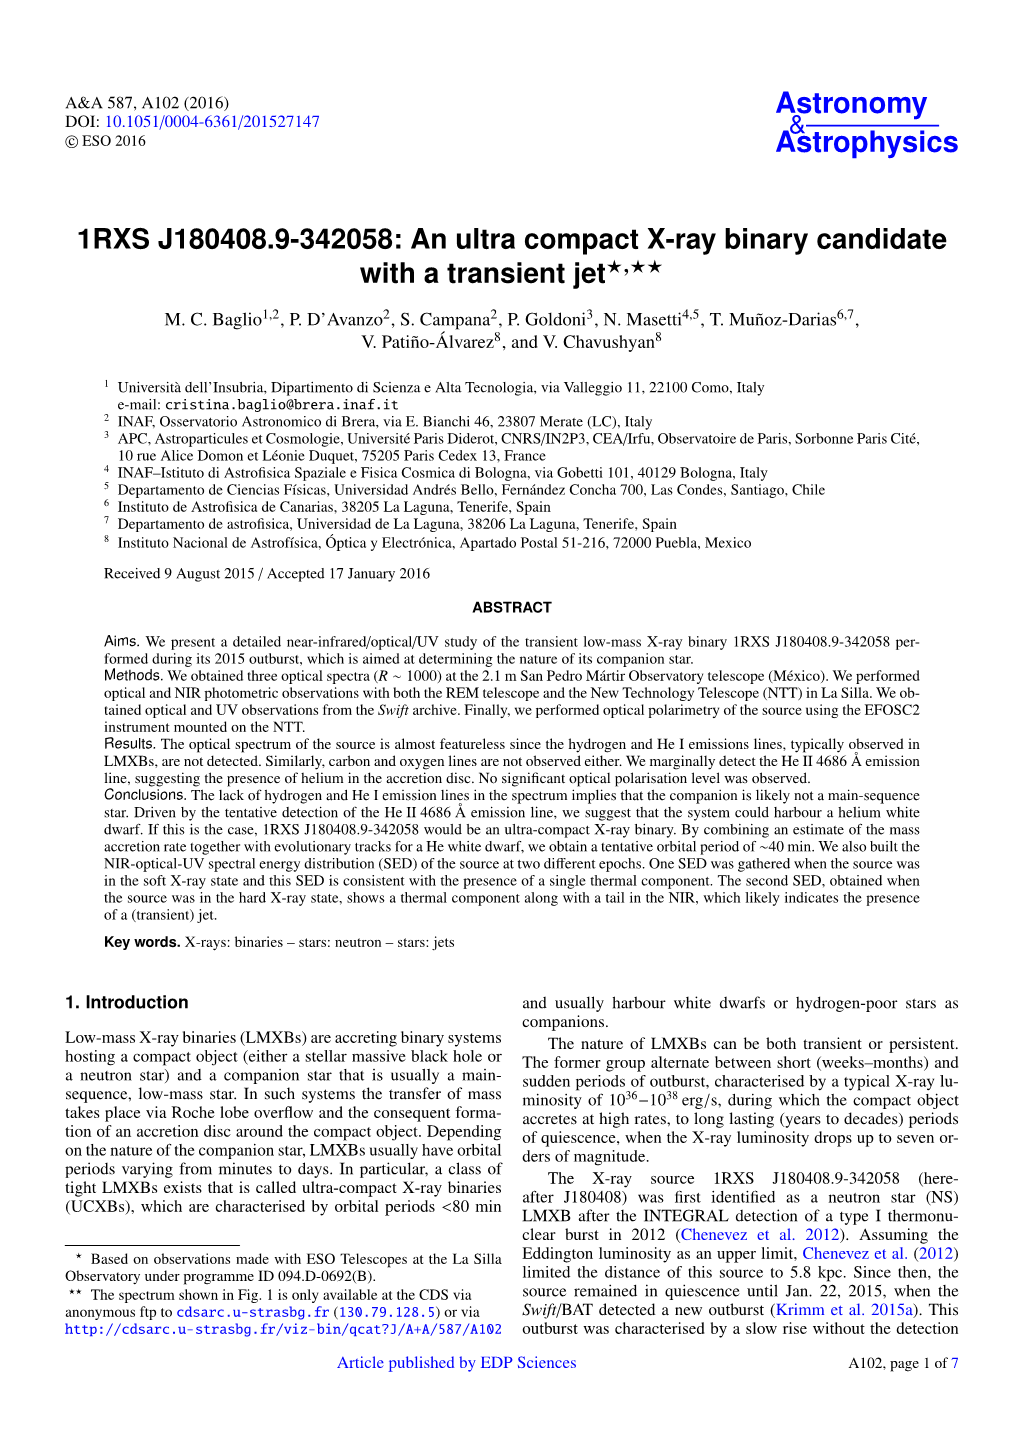 1RXS J180408.9-342058: an Ultra Compact X-Ray Binary Candidate with a Transient Jet?,??